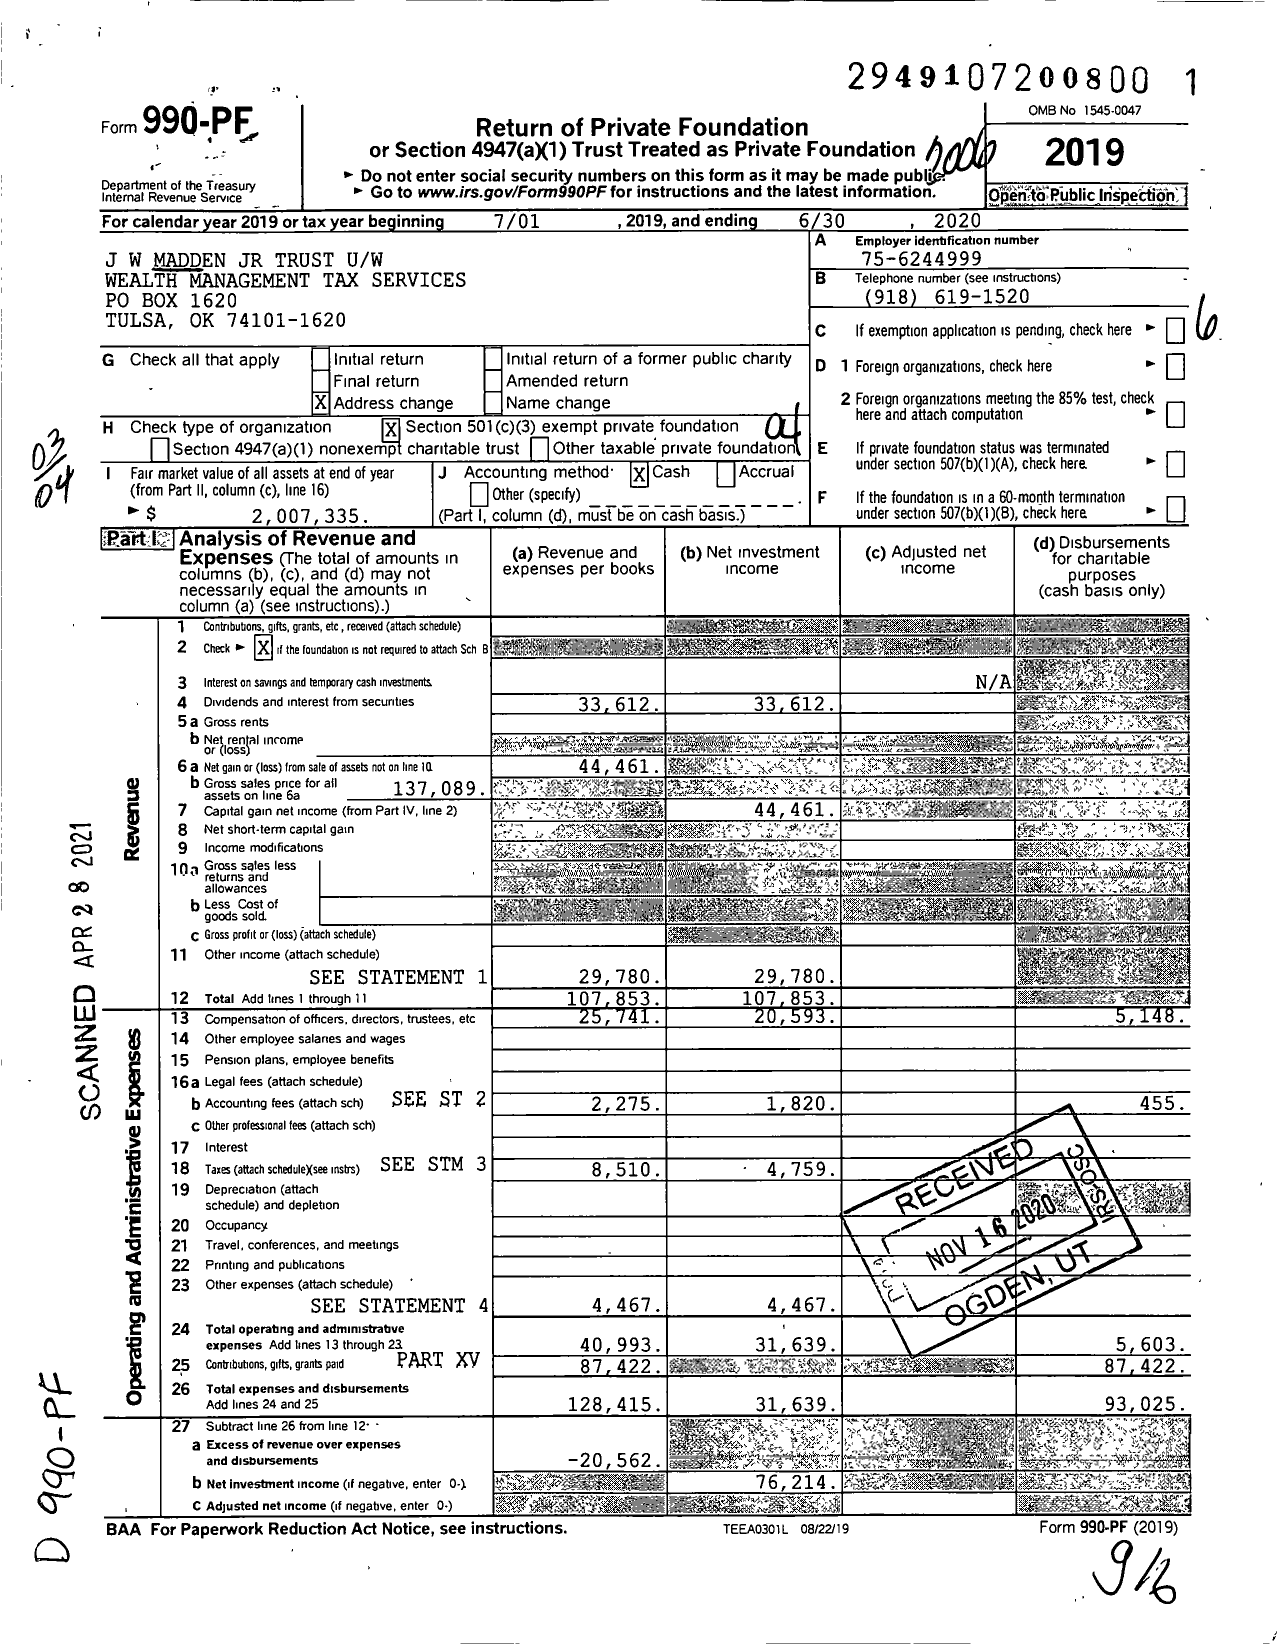 Image of first page of 2019 Form 990PF for J W Madden JR Trust Uw Wealth Management Tax Services